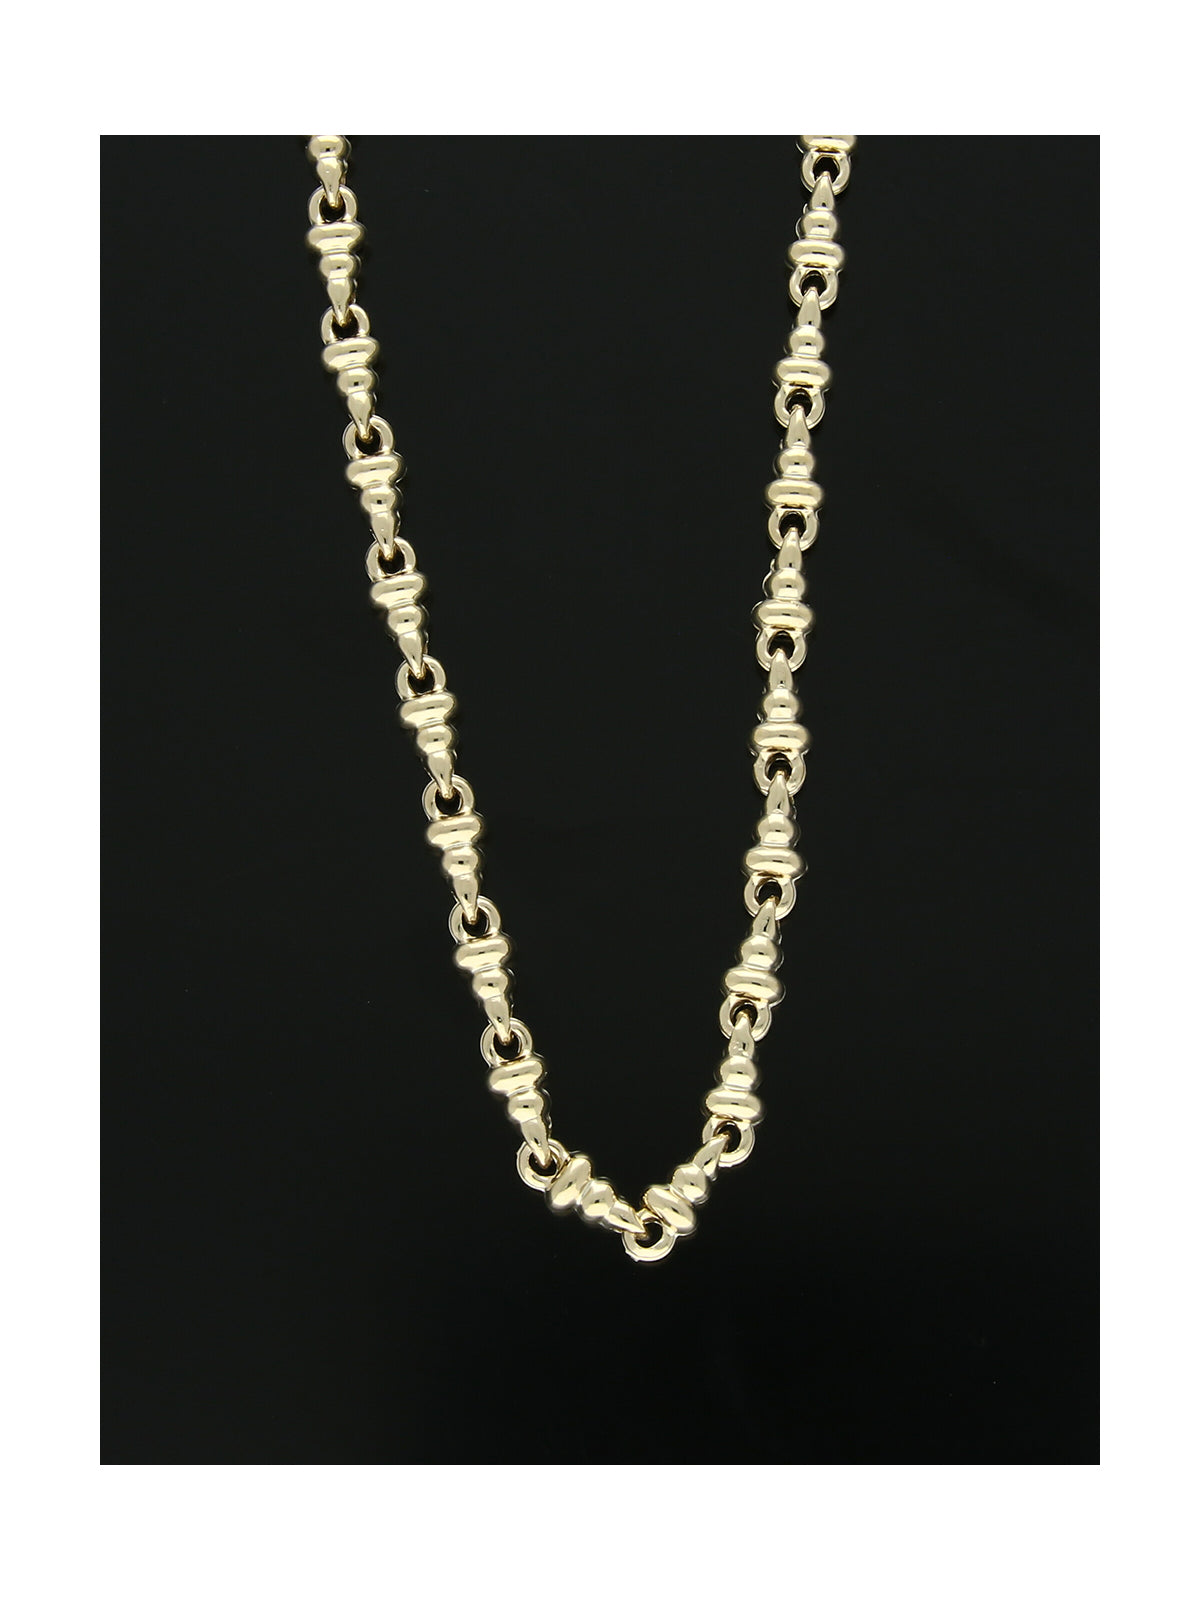 Spinning Top Link Necklace in 9ct Yellow Gold